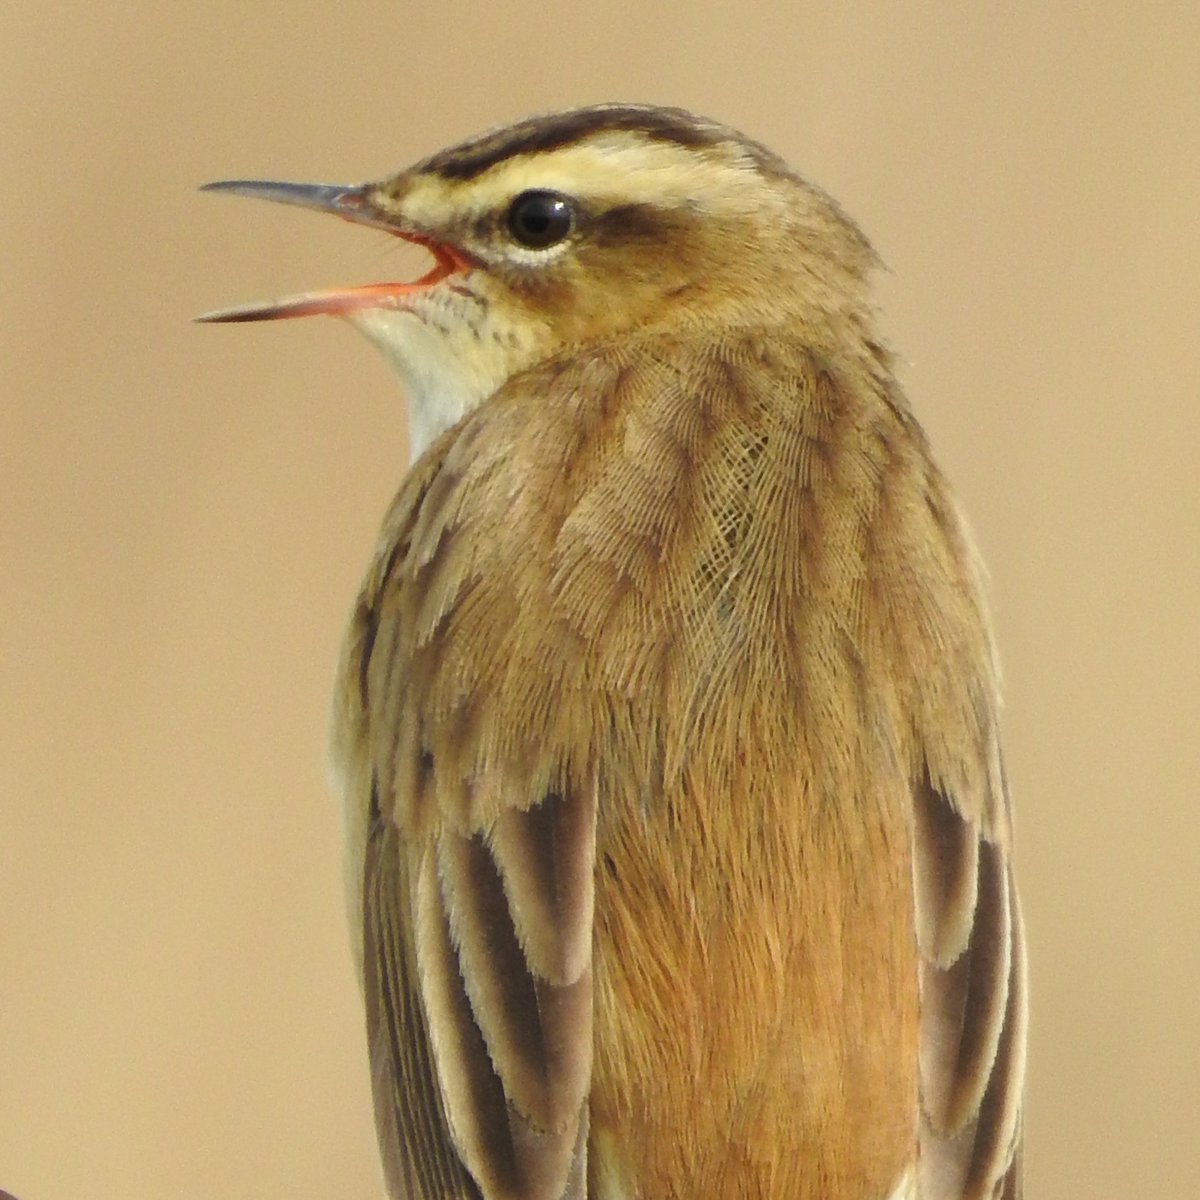 Sedge Warblers are back. They have returned from Africa where they have spent their winter. #LondonBirds #nature #wildlife @WildLondon #sensesofspring @Natures_Voice #springwatch